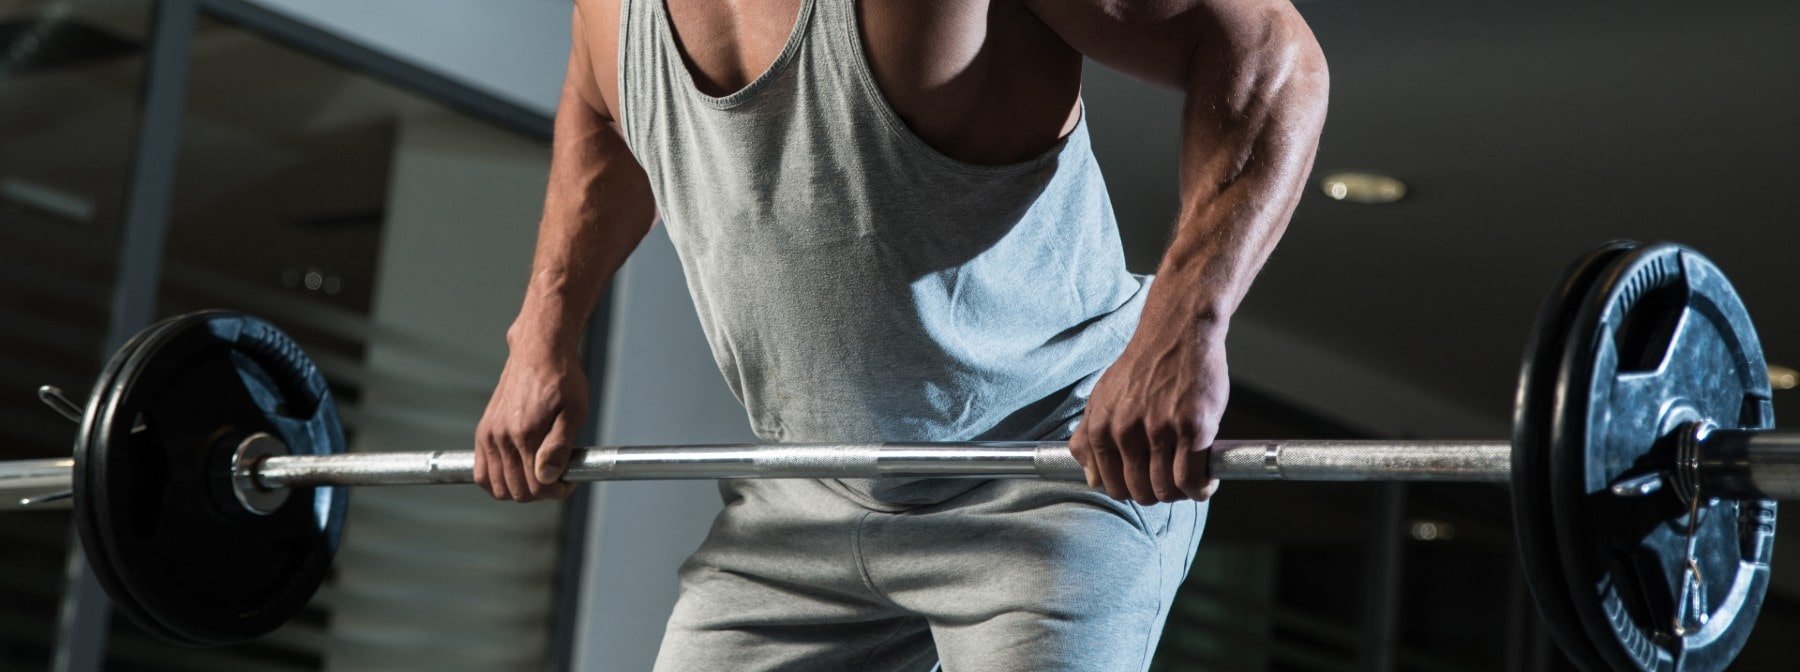 How To Do Bent-Over Barbell Row